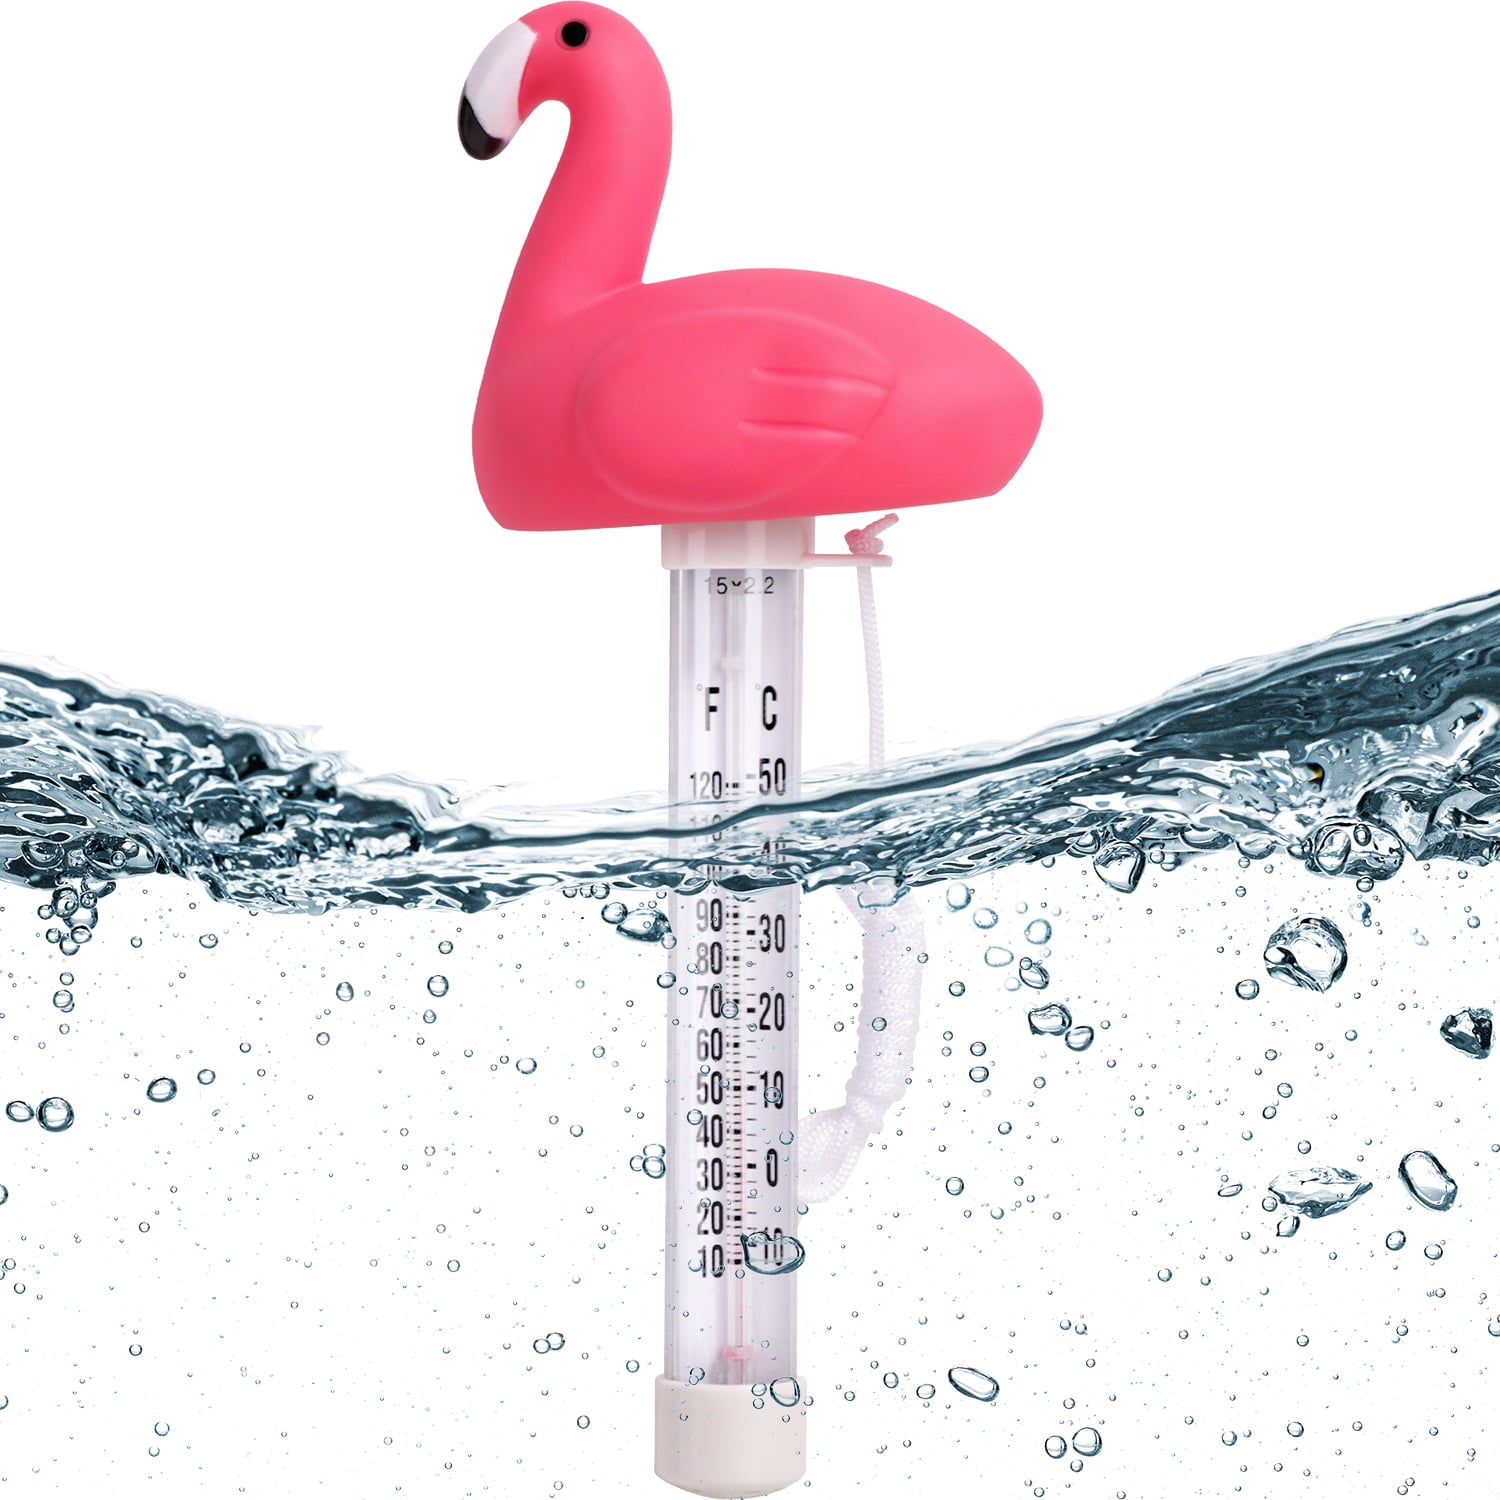 Boxgear Flamingo Floating Pool Thermometer - Aquarium Thermometer Water Temperature from -10 to 50°C - Shatter Proof Pool Thermometer Floater with Tether for Outdoor & Indoor Swimming Pools, Ponds